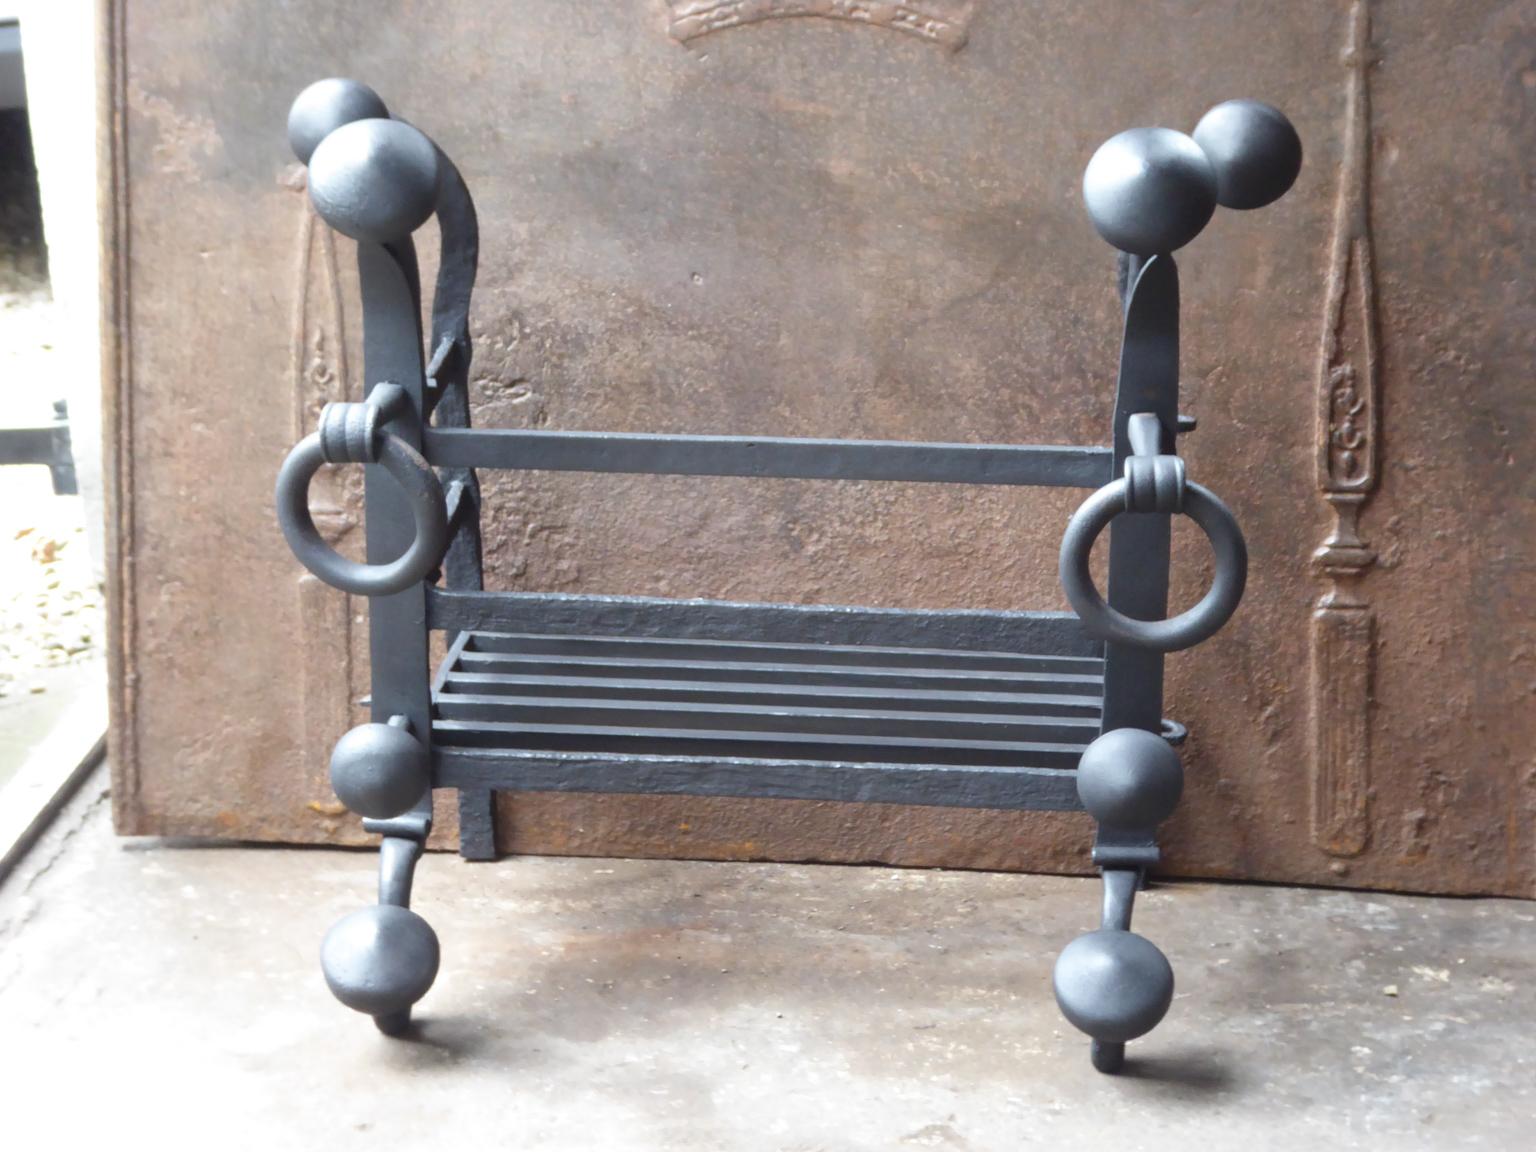 Dutch 17th - 18th century fireplace basket or fire grate from the Louis XIV period. The fireplace grate is made of wrought iron. The condition is good.



















 